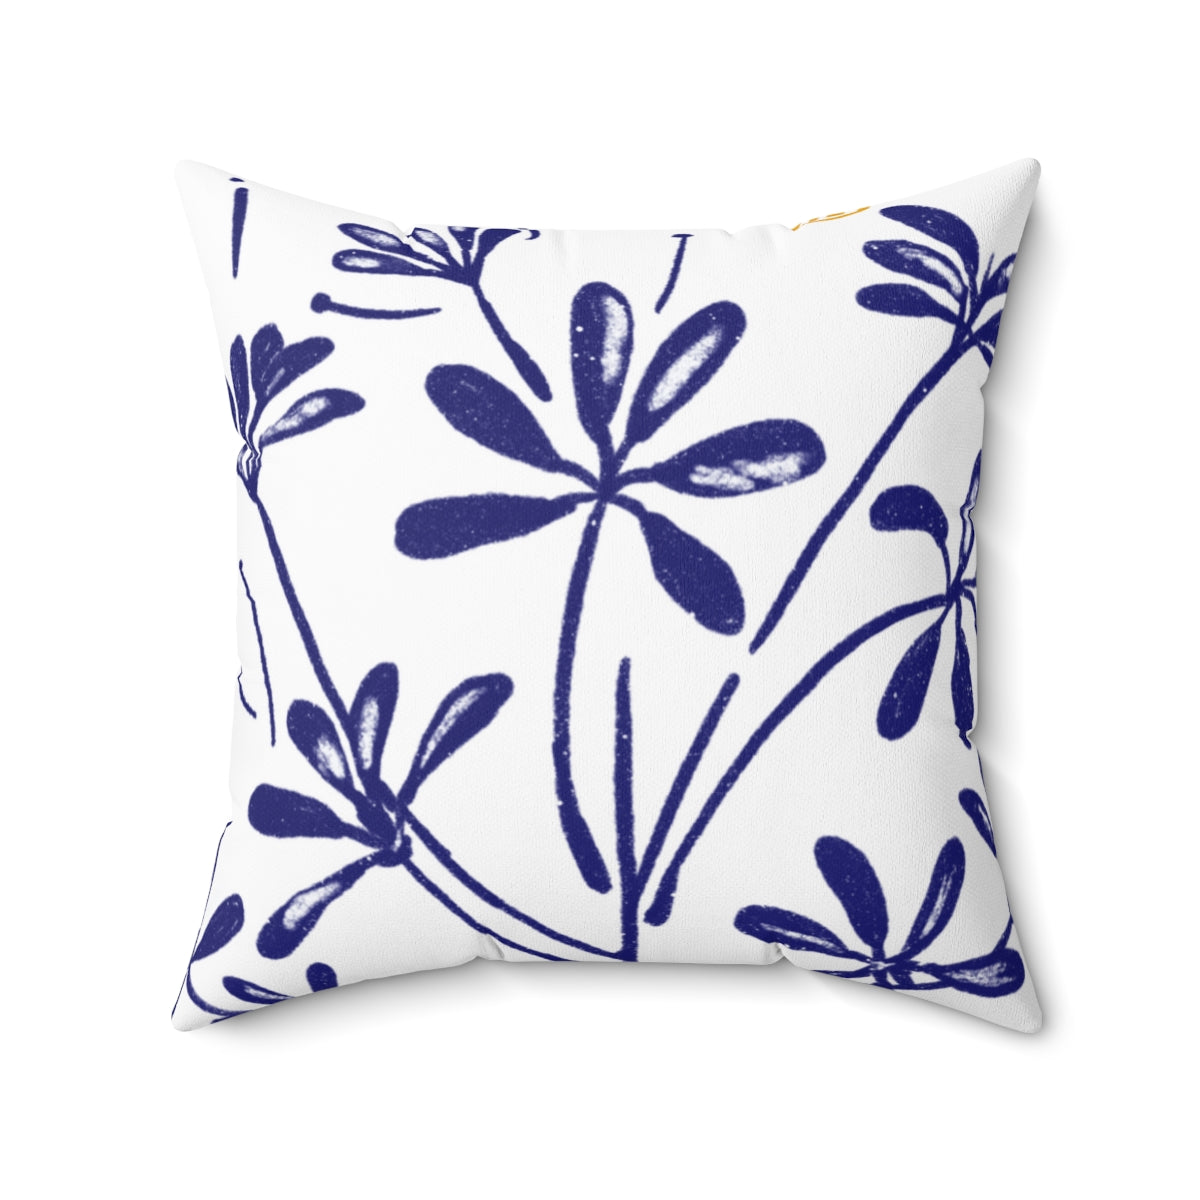 Blue indoor plant Pillow Case - Spun Polyester Square